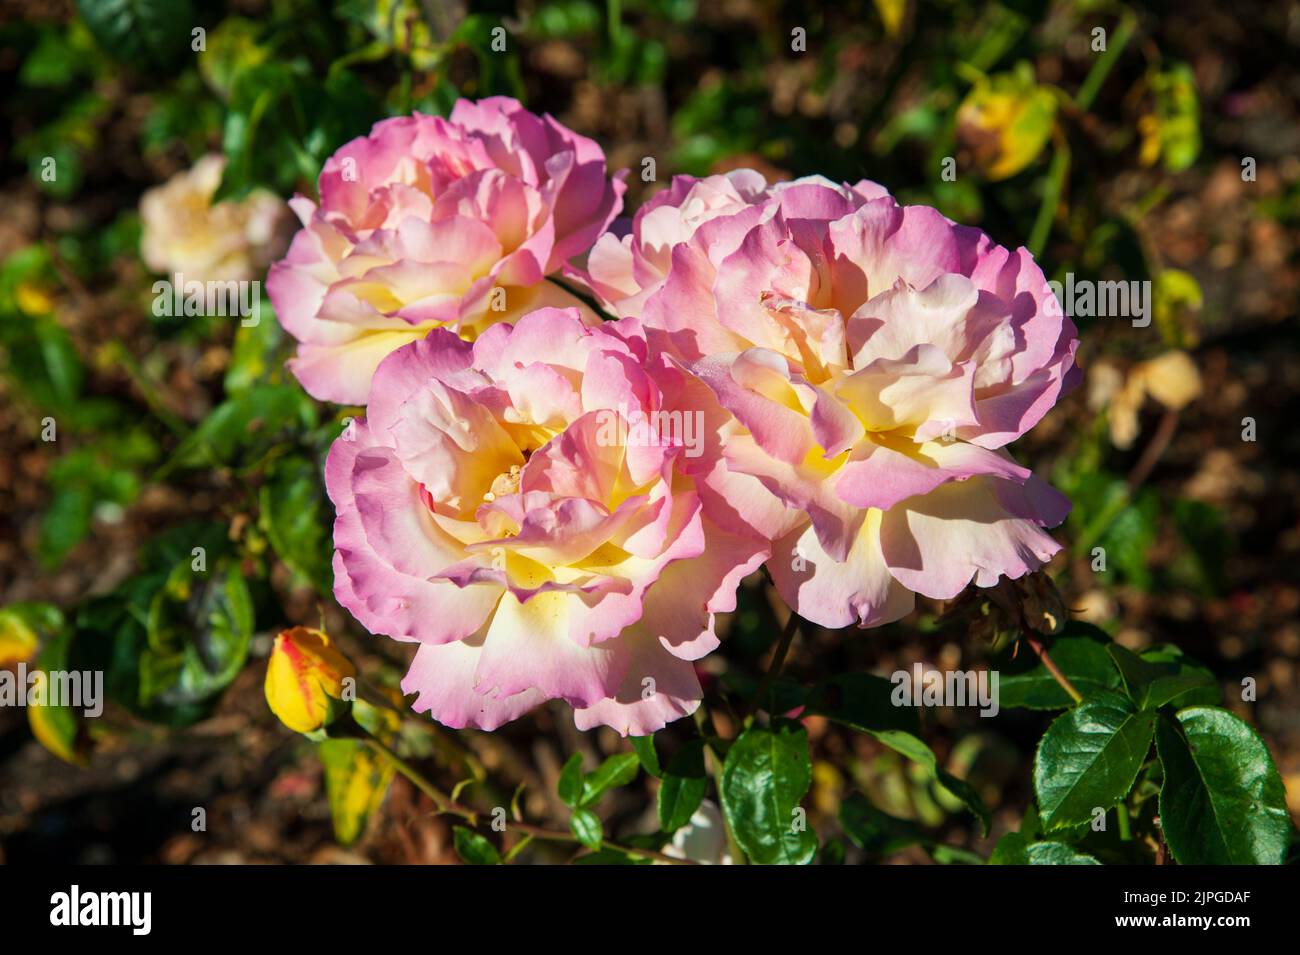 Beautiful Pink roses blossom in the garden on a sunny day Stock Photo